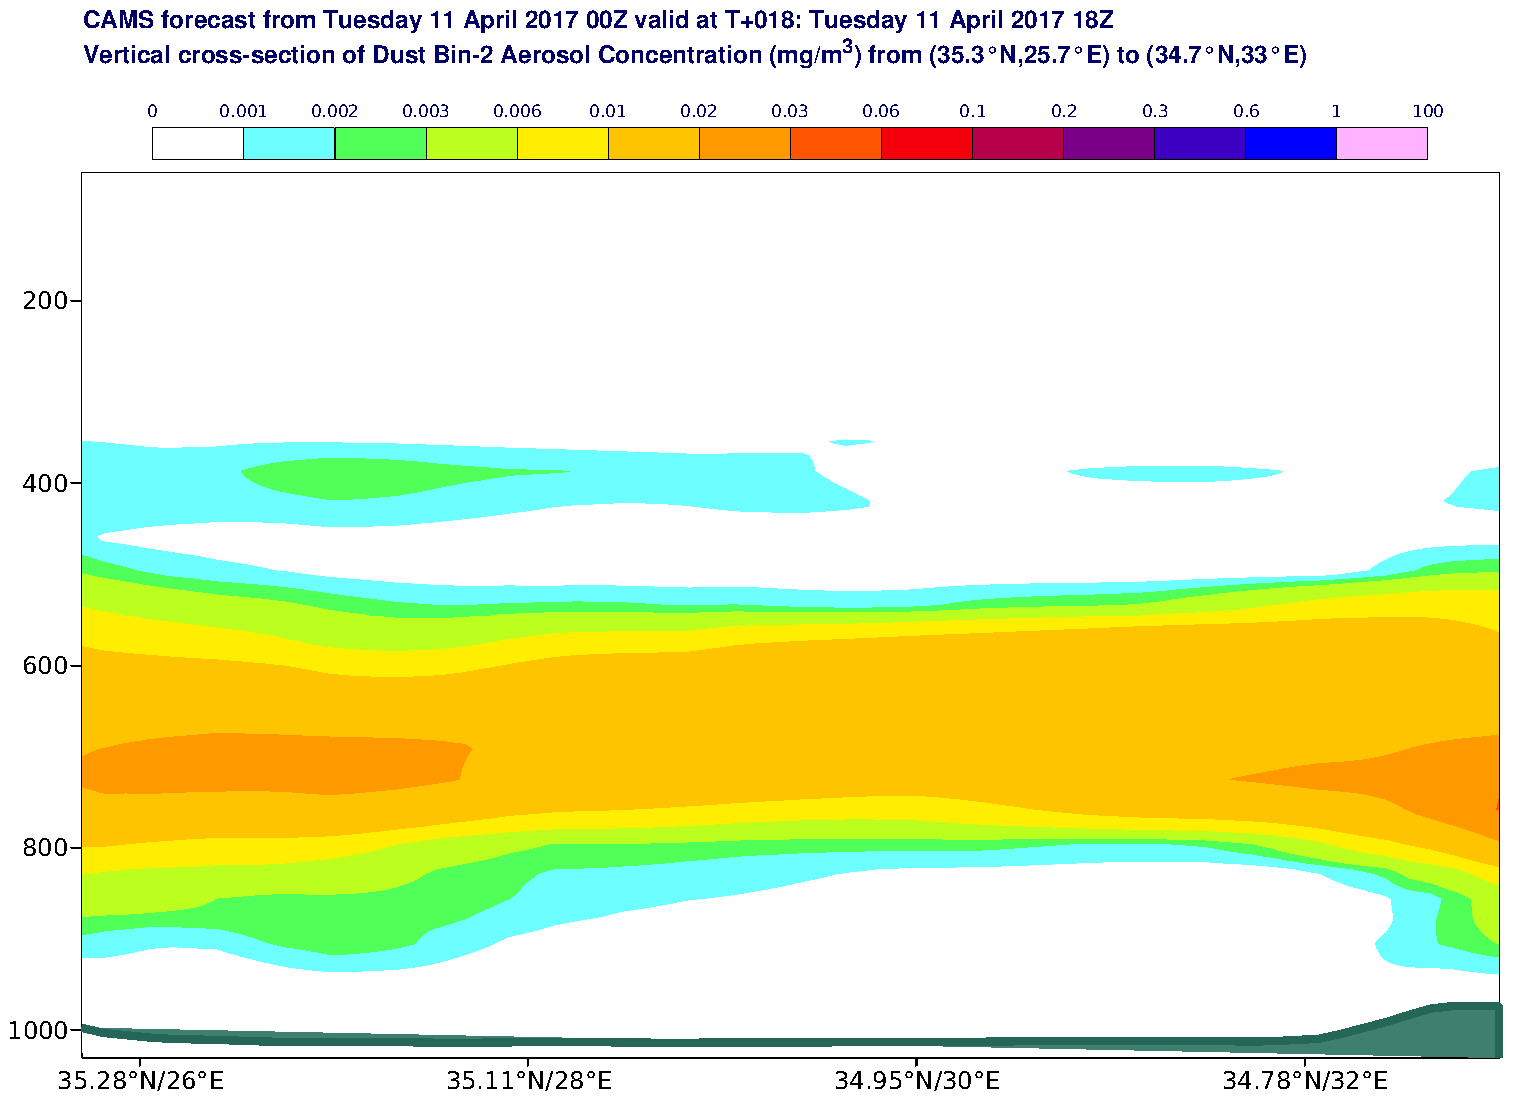 Vertical cross-section of Dust Bin-2 Aerosol Concentration (mg/m3) valid at T18 - 2017-04-11 18:00